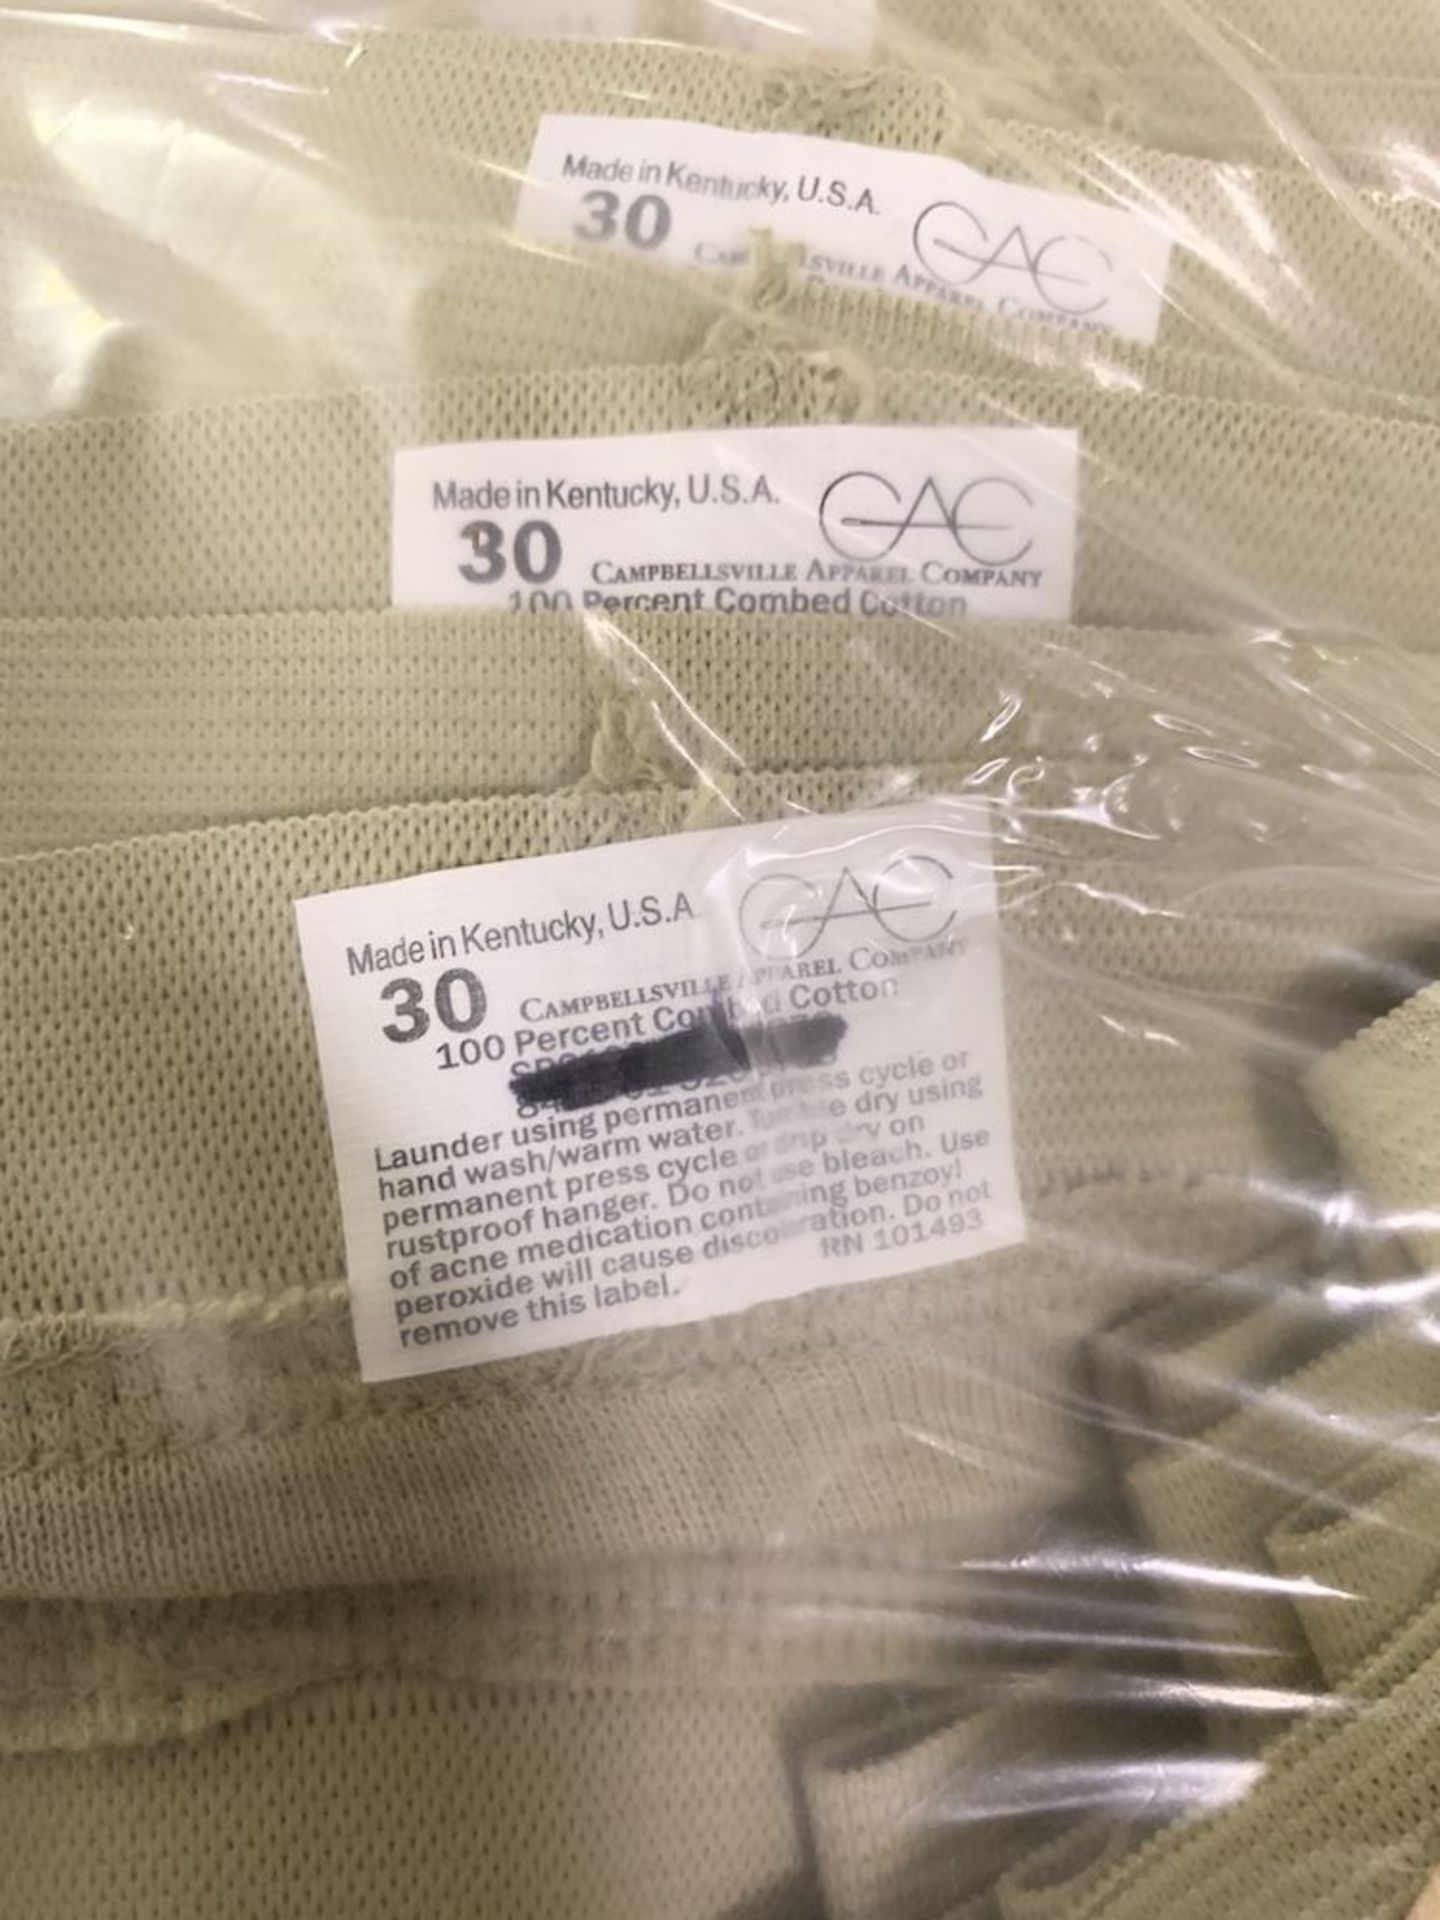 600 Pairs of Men's Cotton Underwear, Campbellsville Apparel Brand, Tan/Sand Color, Retail $3,000 - Image 4 of 4